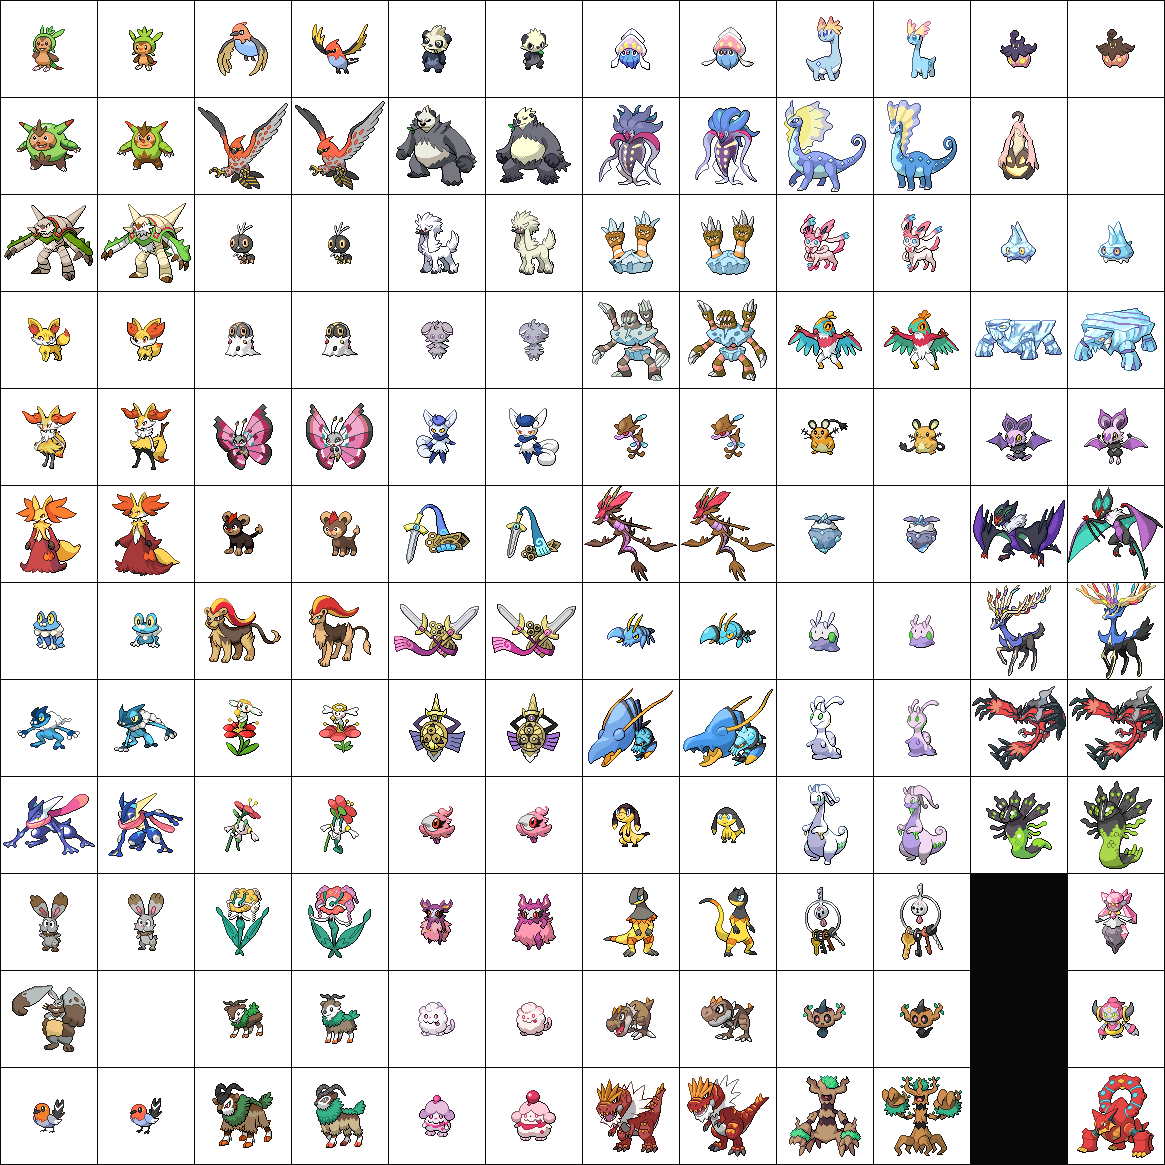 xy-sprites.png